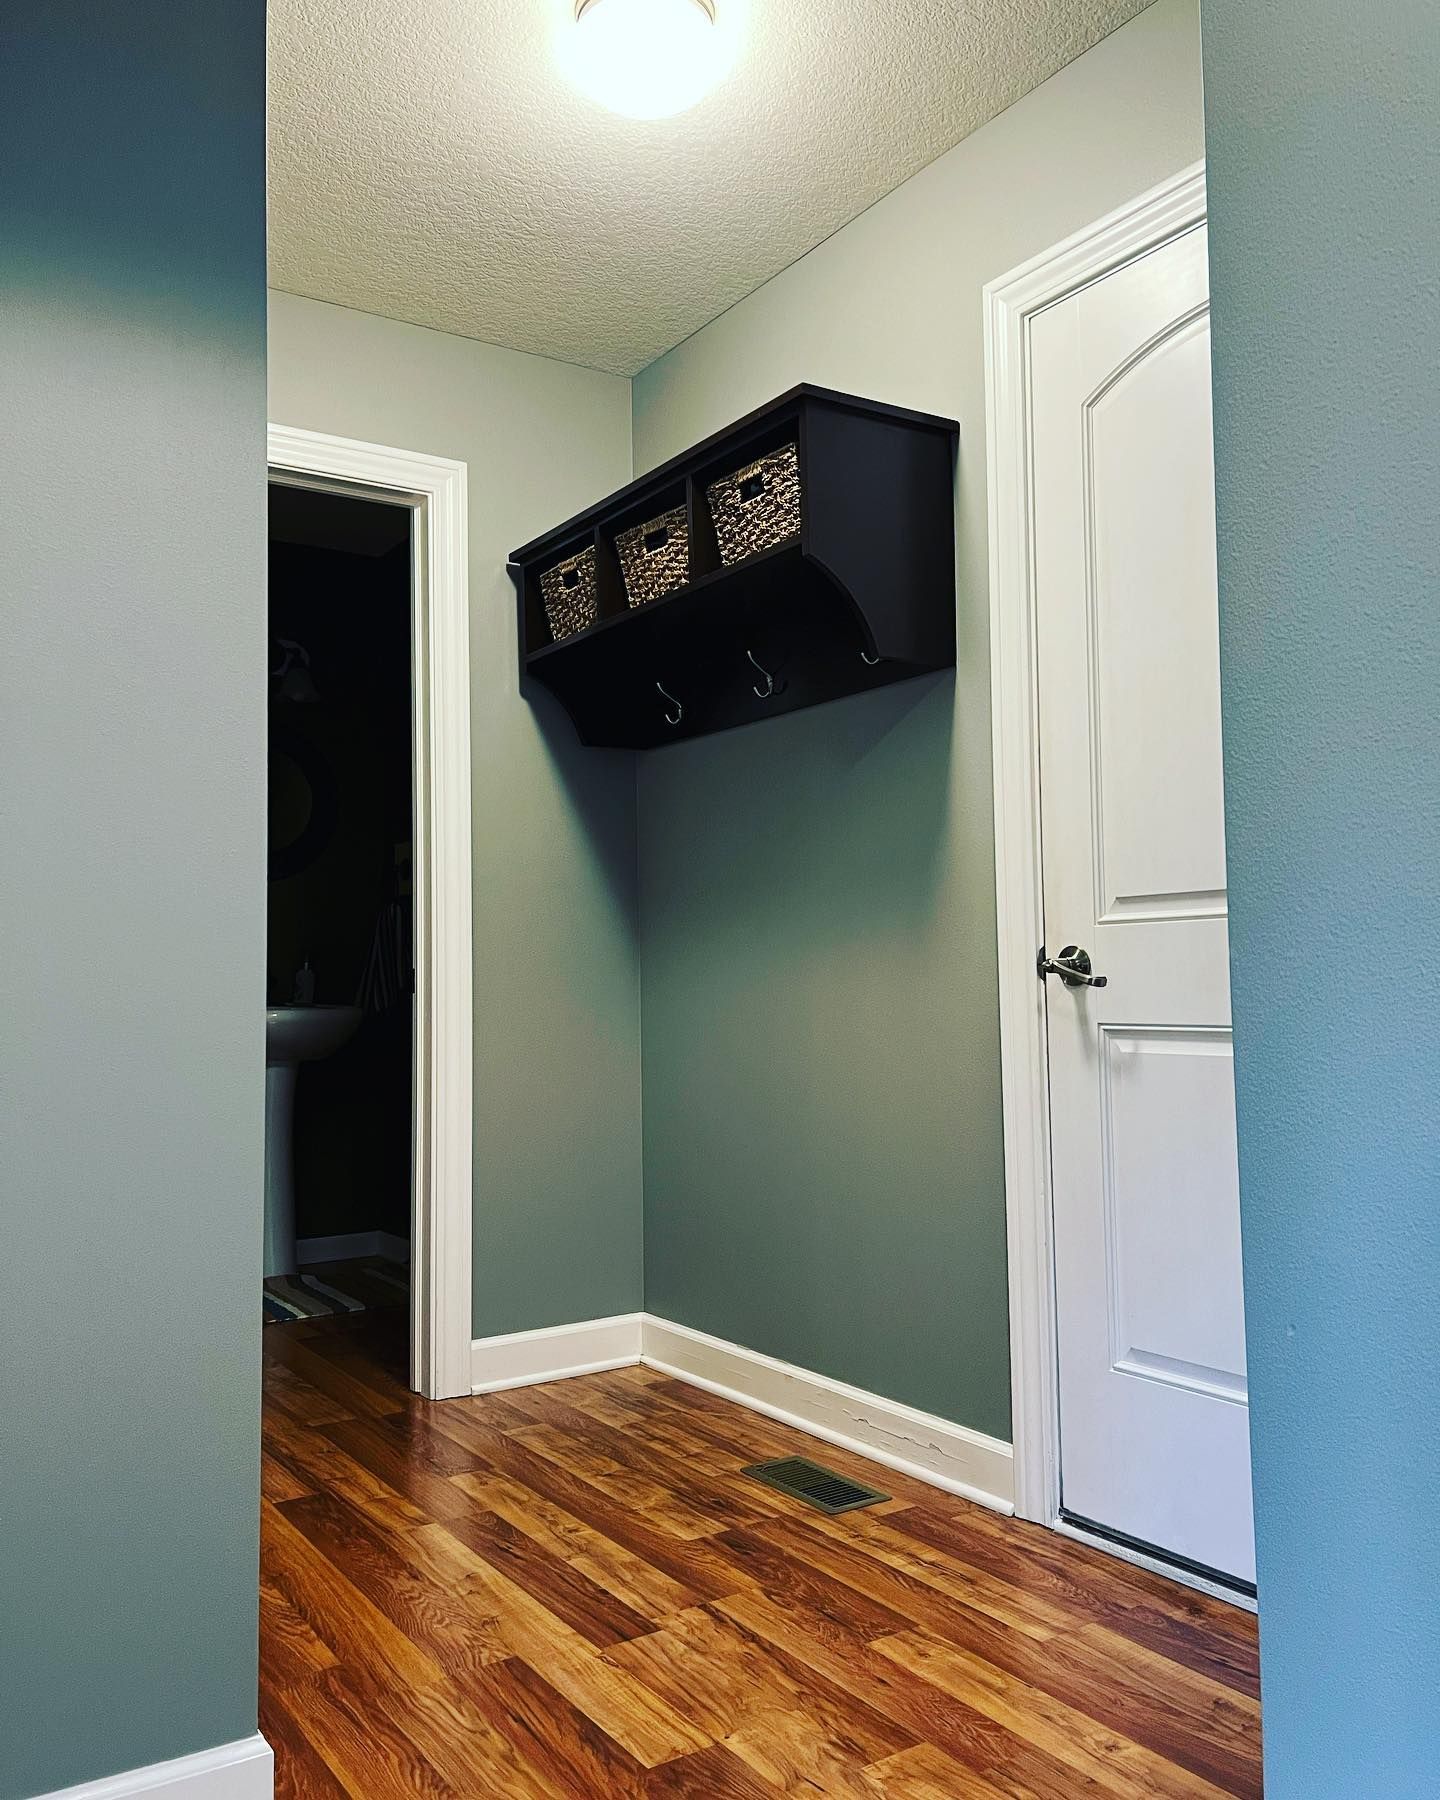  for True Blue Painting, LLC in Des Moines, IA